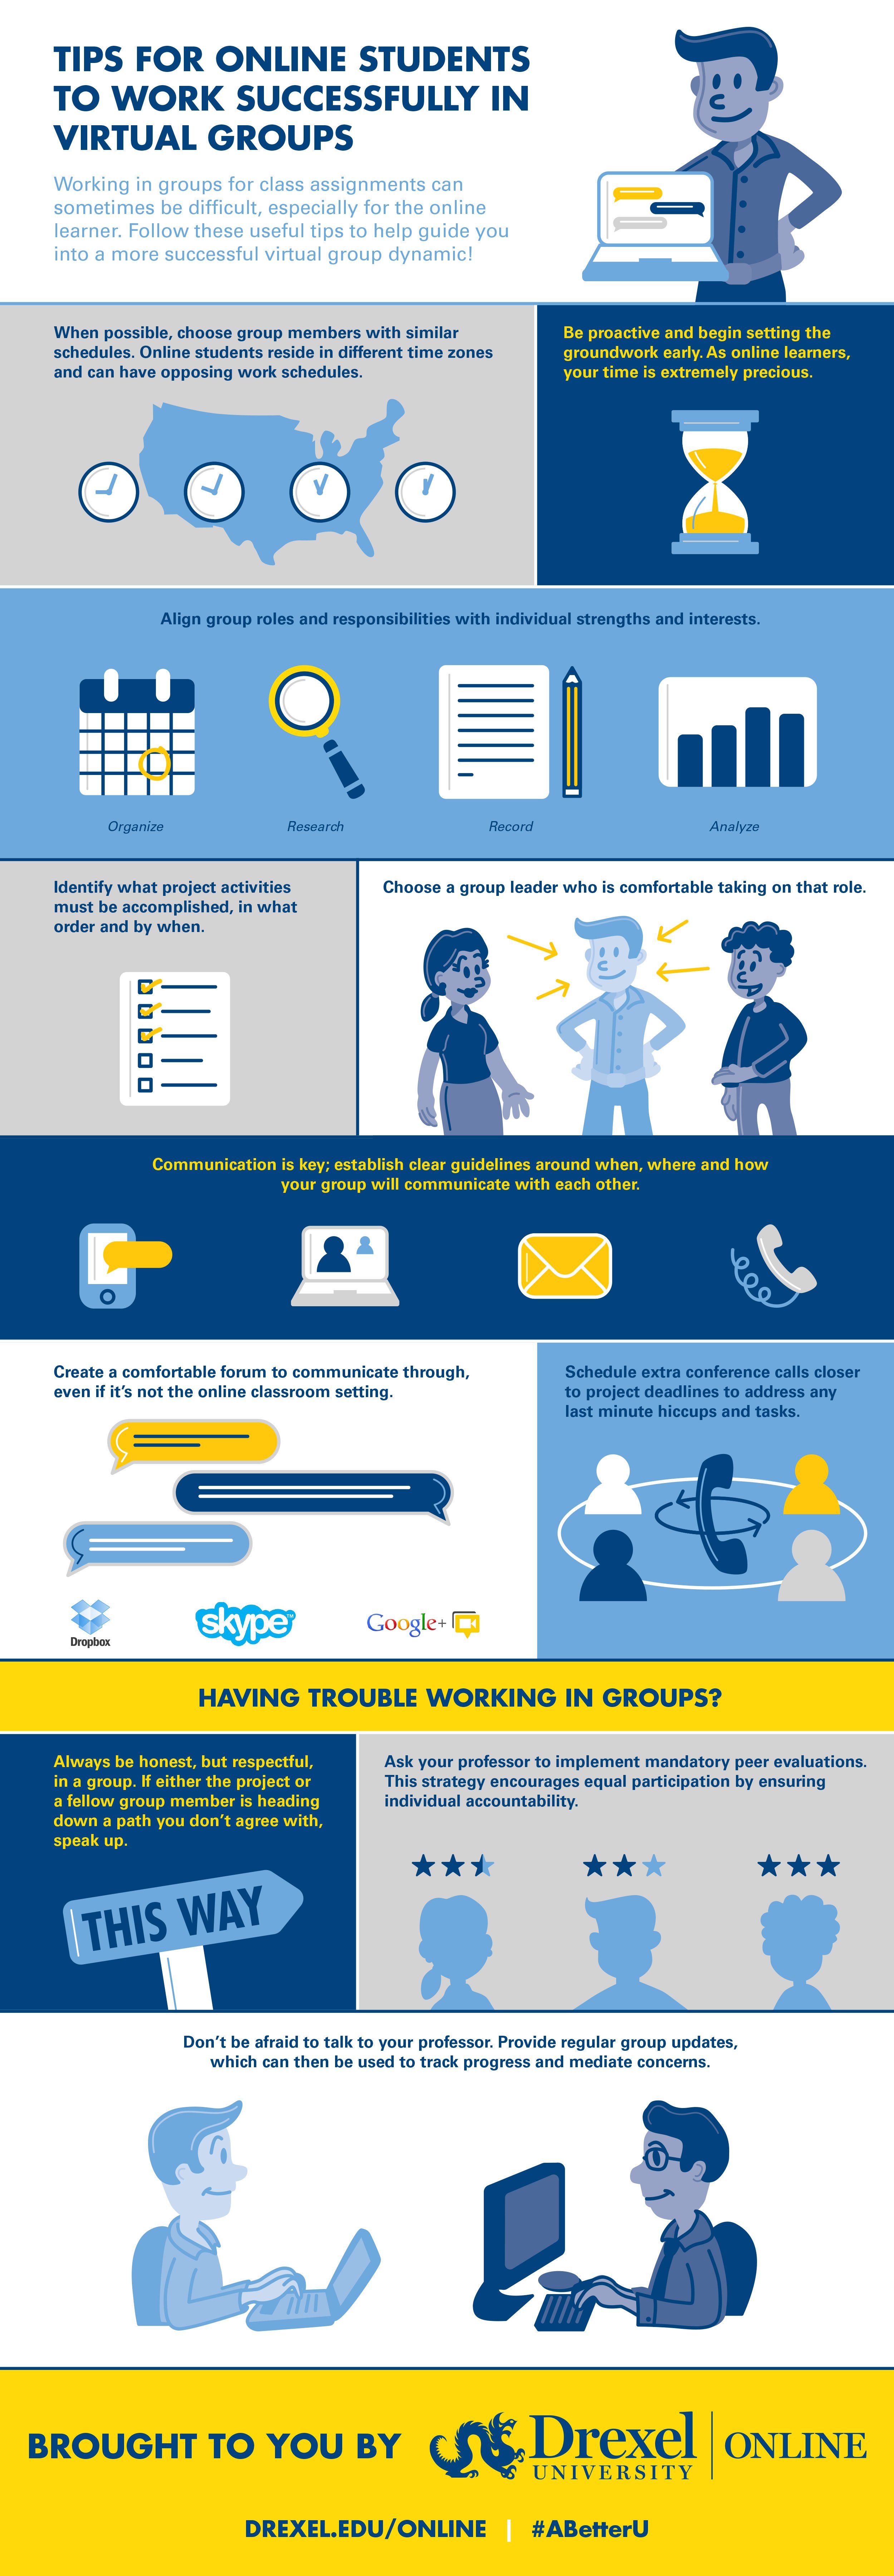 Full infographic on tips for participating in group work and projects online created by Drexel University Online